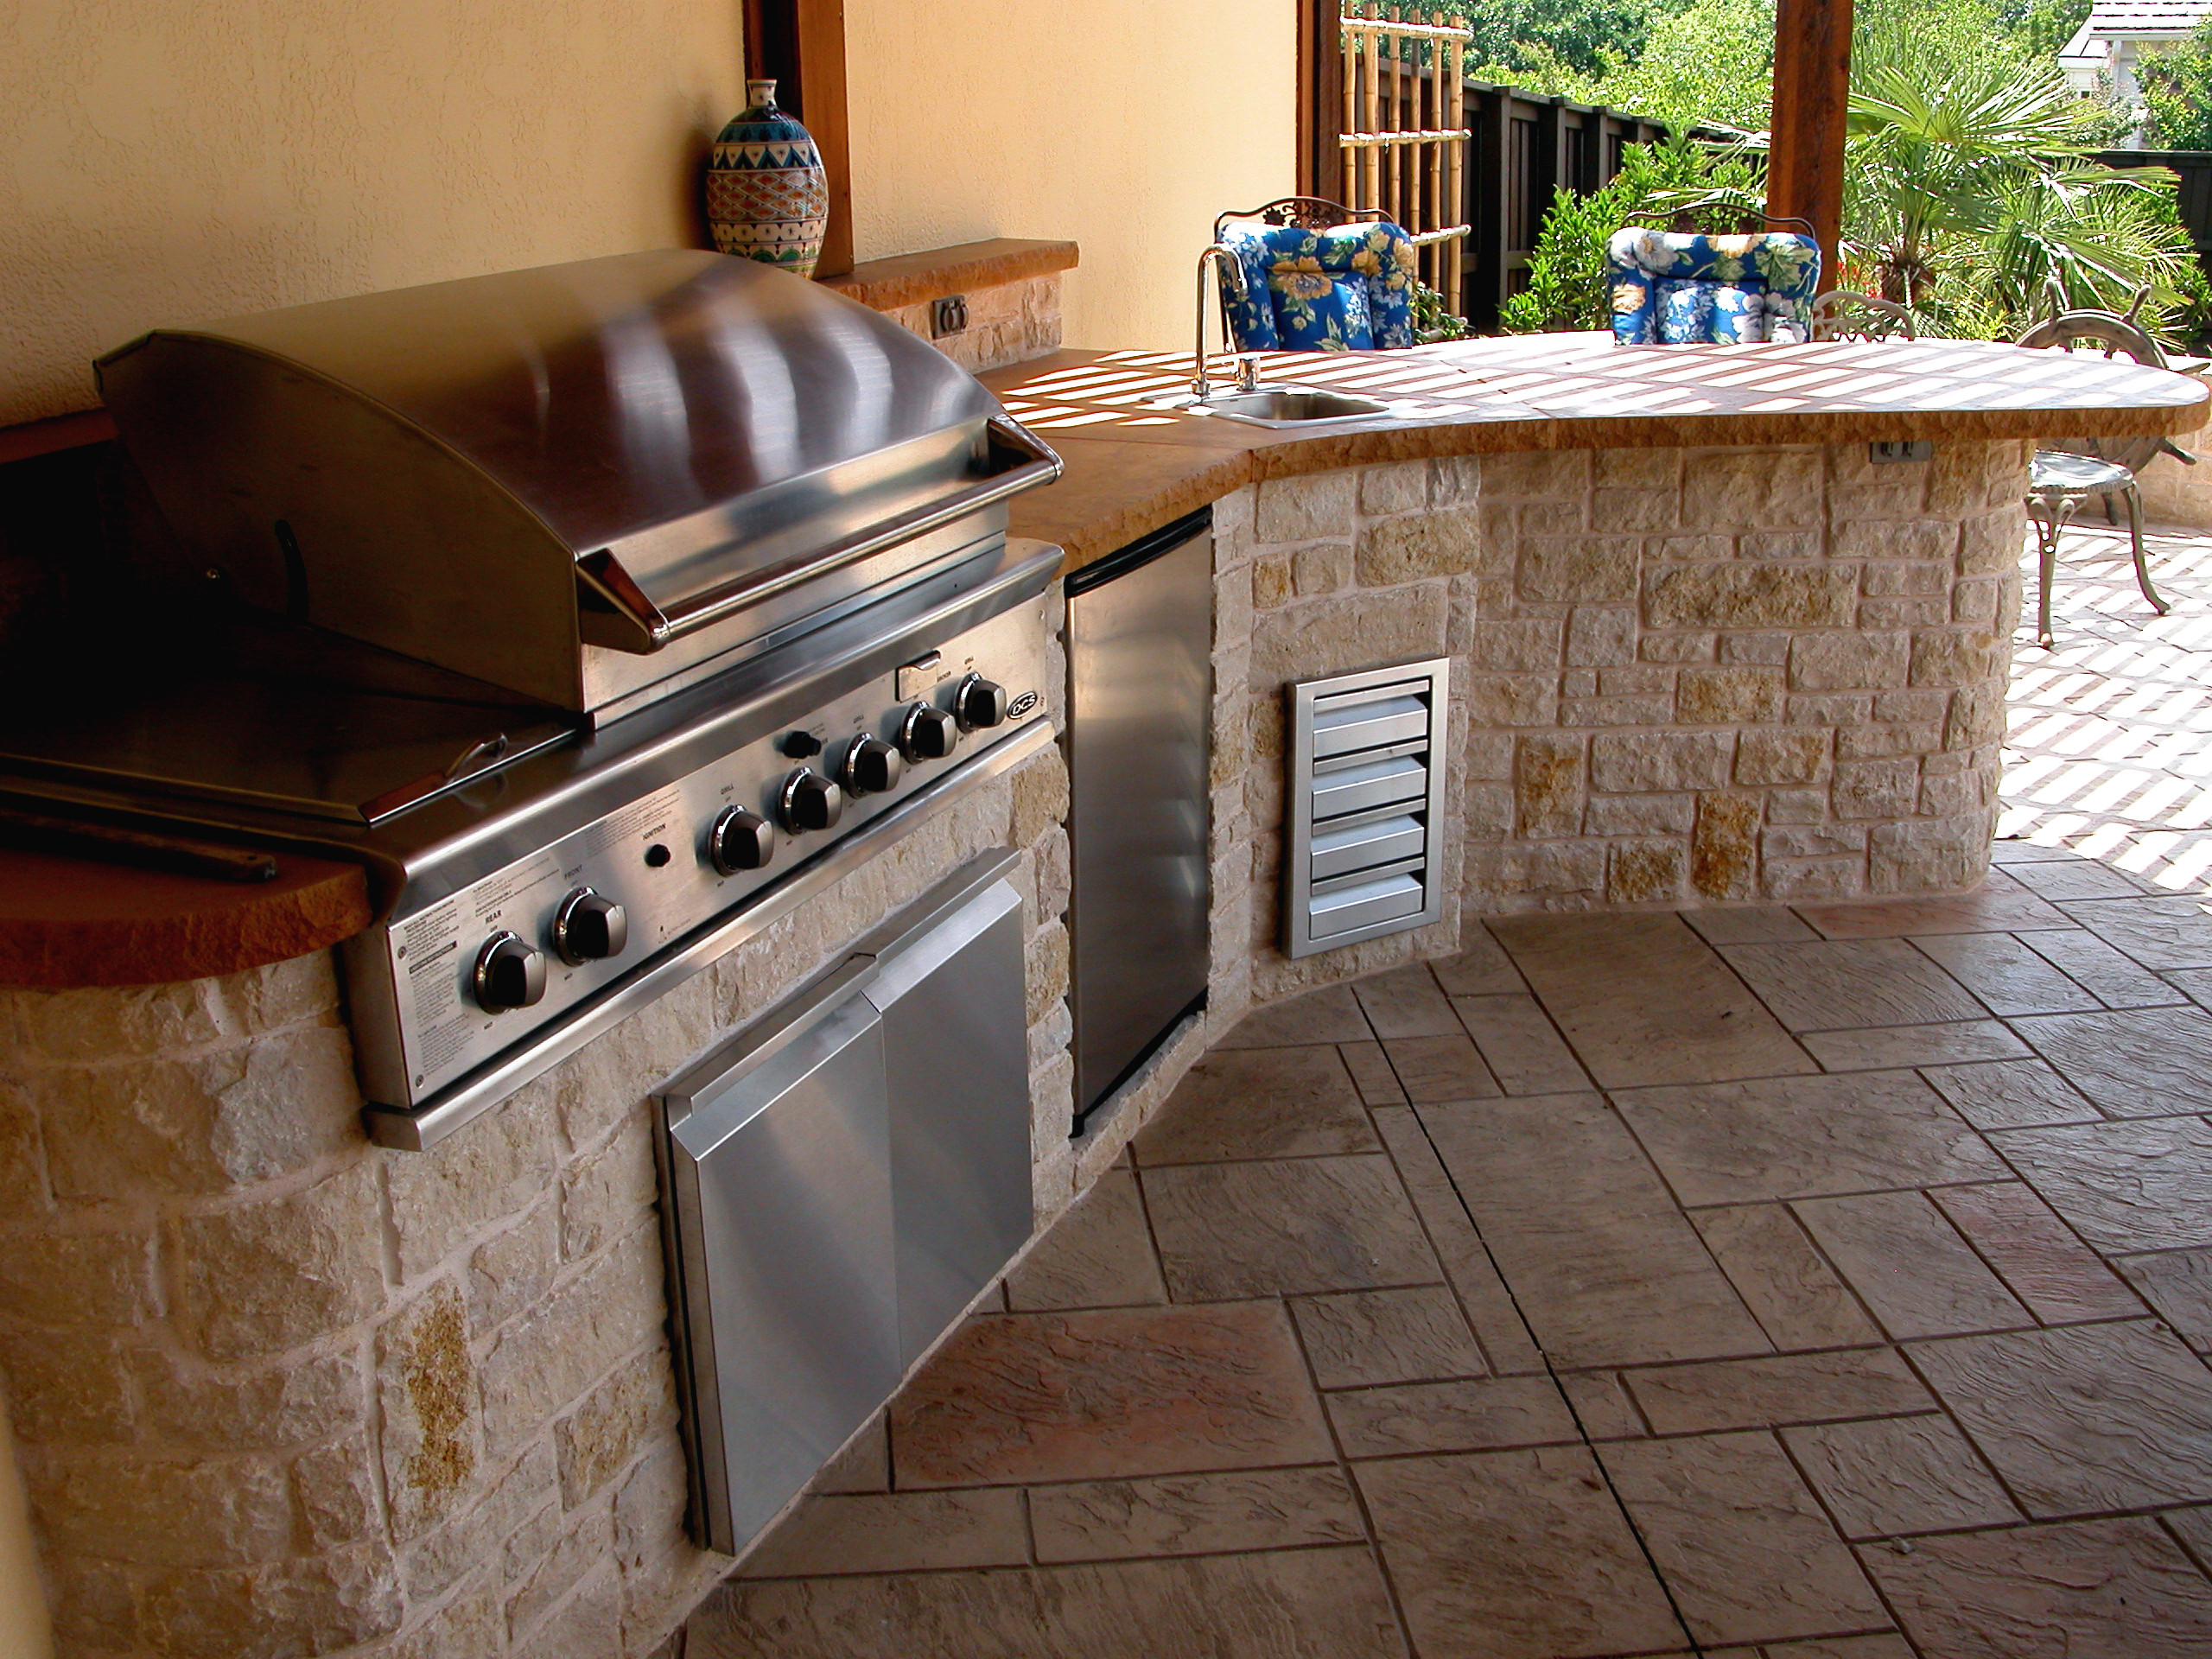 © Daniel Bowman Ashe www.visuocreative.com for Dal-Rich Construction, Inc.
Patio kitchen – mid-sized traditional backyard stone patio kitchen idea in Dallas with a roof extension